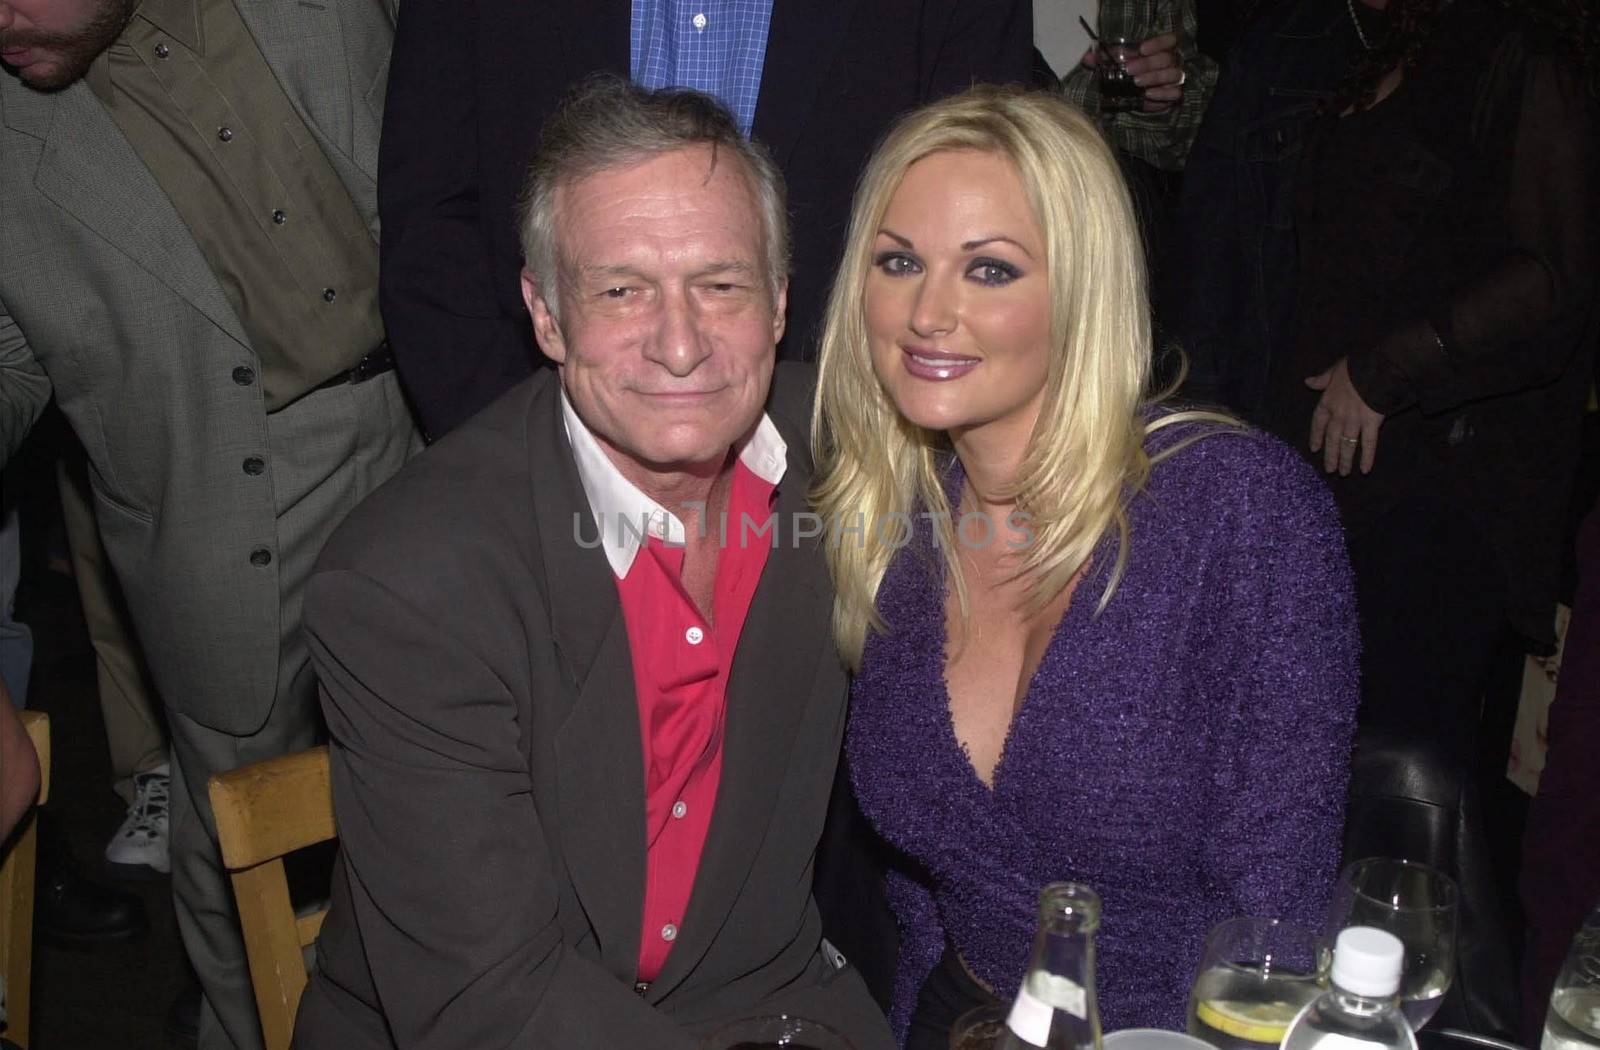 Hugh Hefner and Stacy Valentine at the party and fashion show for the documentary "The Girl Next Door" about a housewife turned adult film actress. West Hollywood, 05-09-00